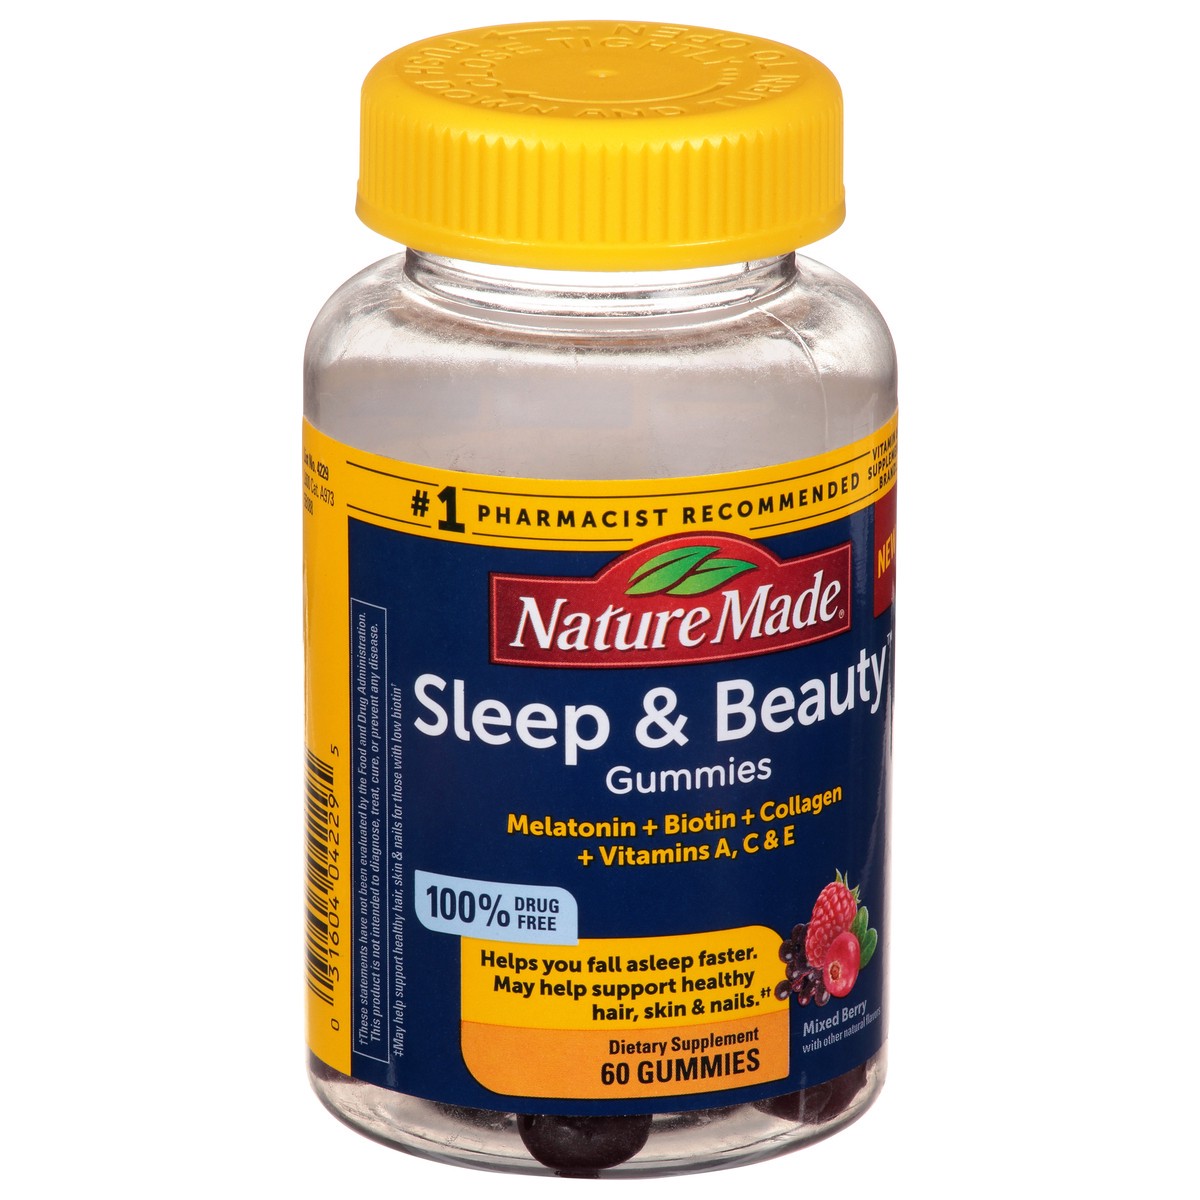 slide 2 of 10, Nature Made Sleep & Beauty Vitamins, Melatonin Helps You Fall Asleep Faster, Biotin May Help Support Healthy Hair, Skin, and Nails, Plus Hydrolyzed Collagen, Vitamins A, C, and E, 60 Gummies, 60 ct